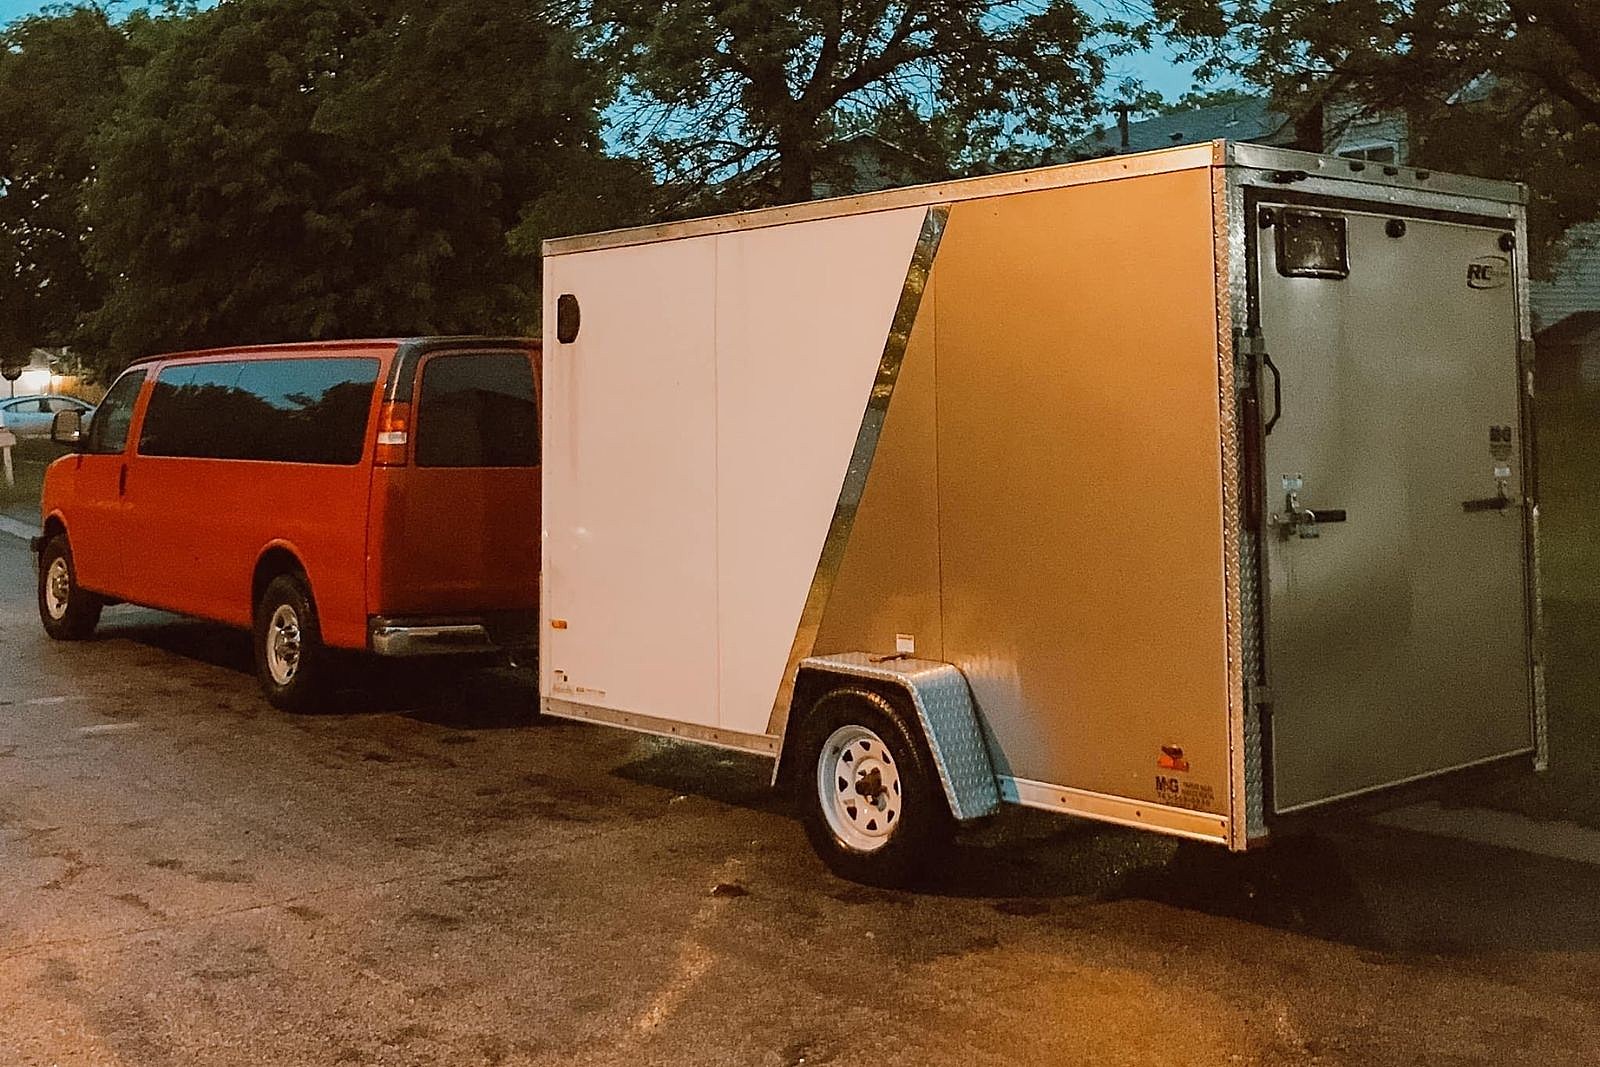 MN Band Asks for Help After Trailer, Gear Stolen in Brooklyn Park